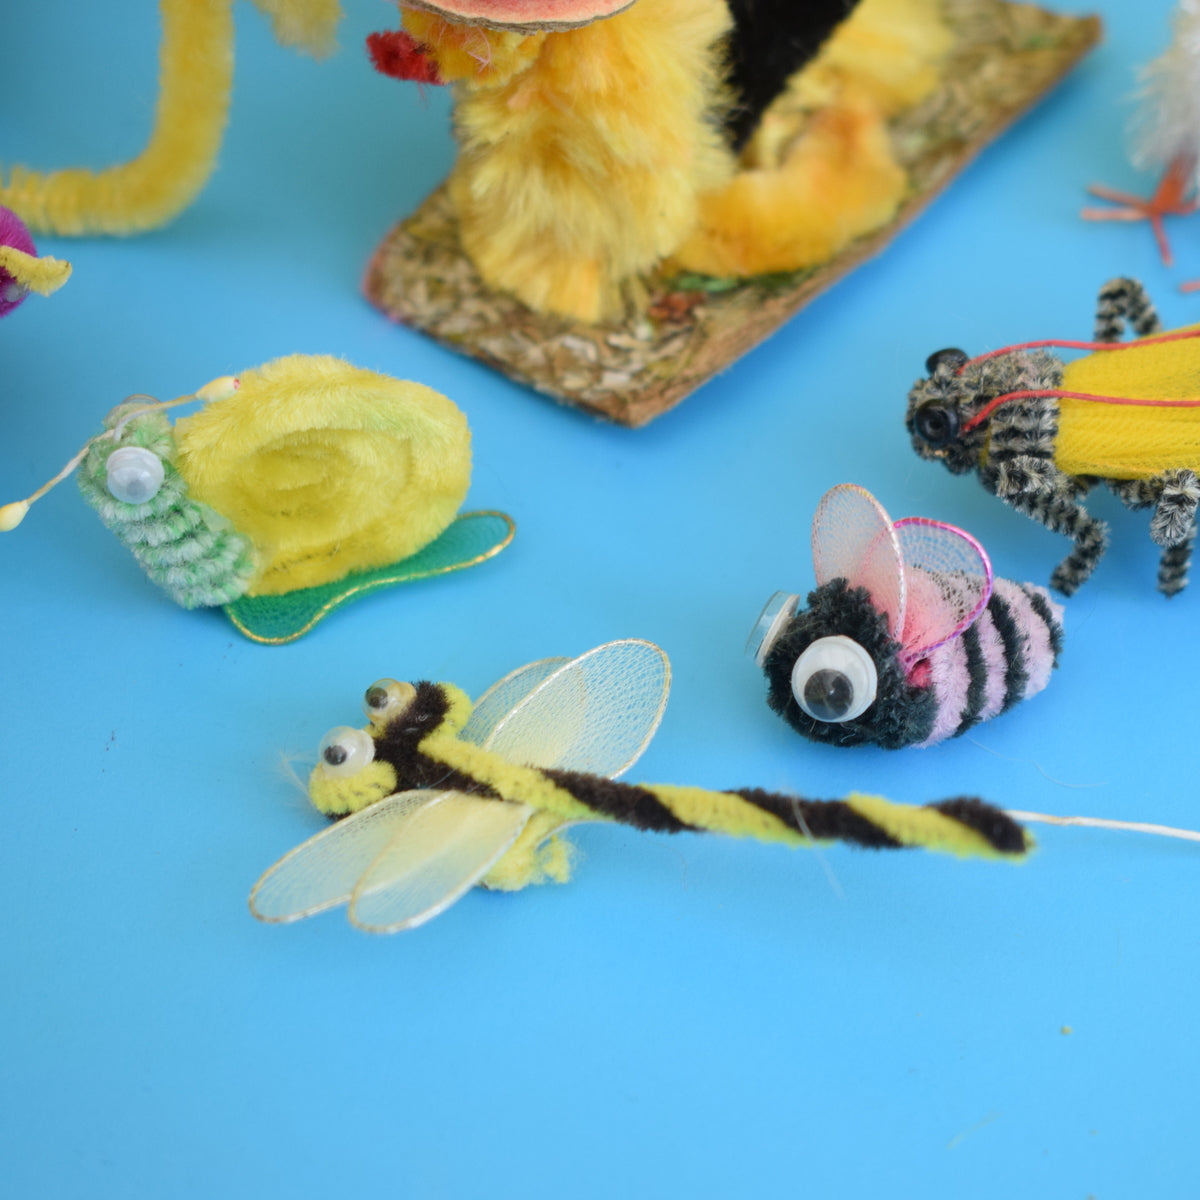 Vintage 1960s Kitsch Pipe Cleaner Creatures / Insects